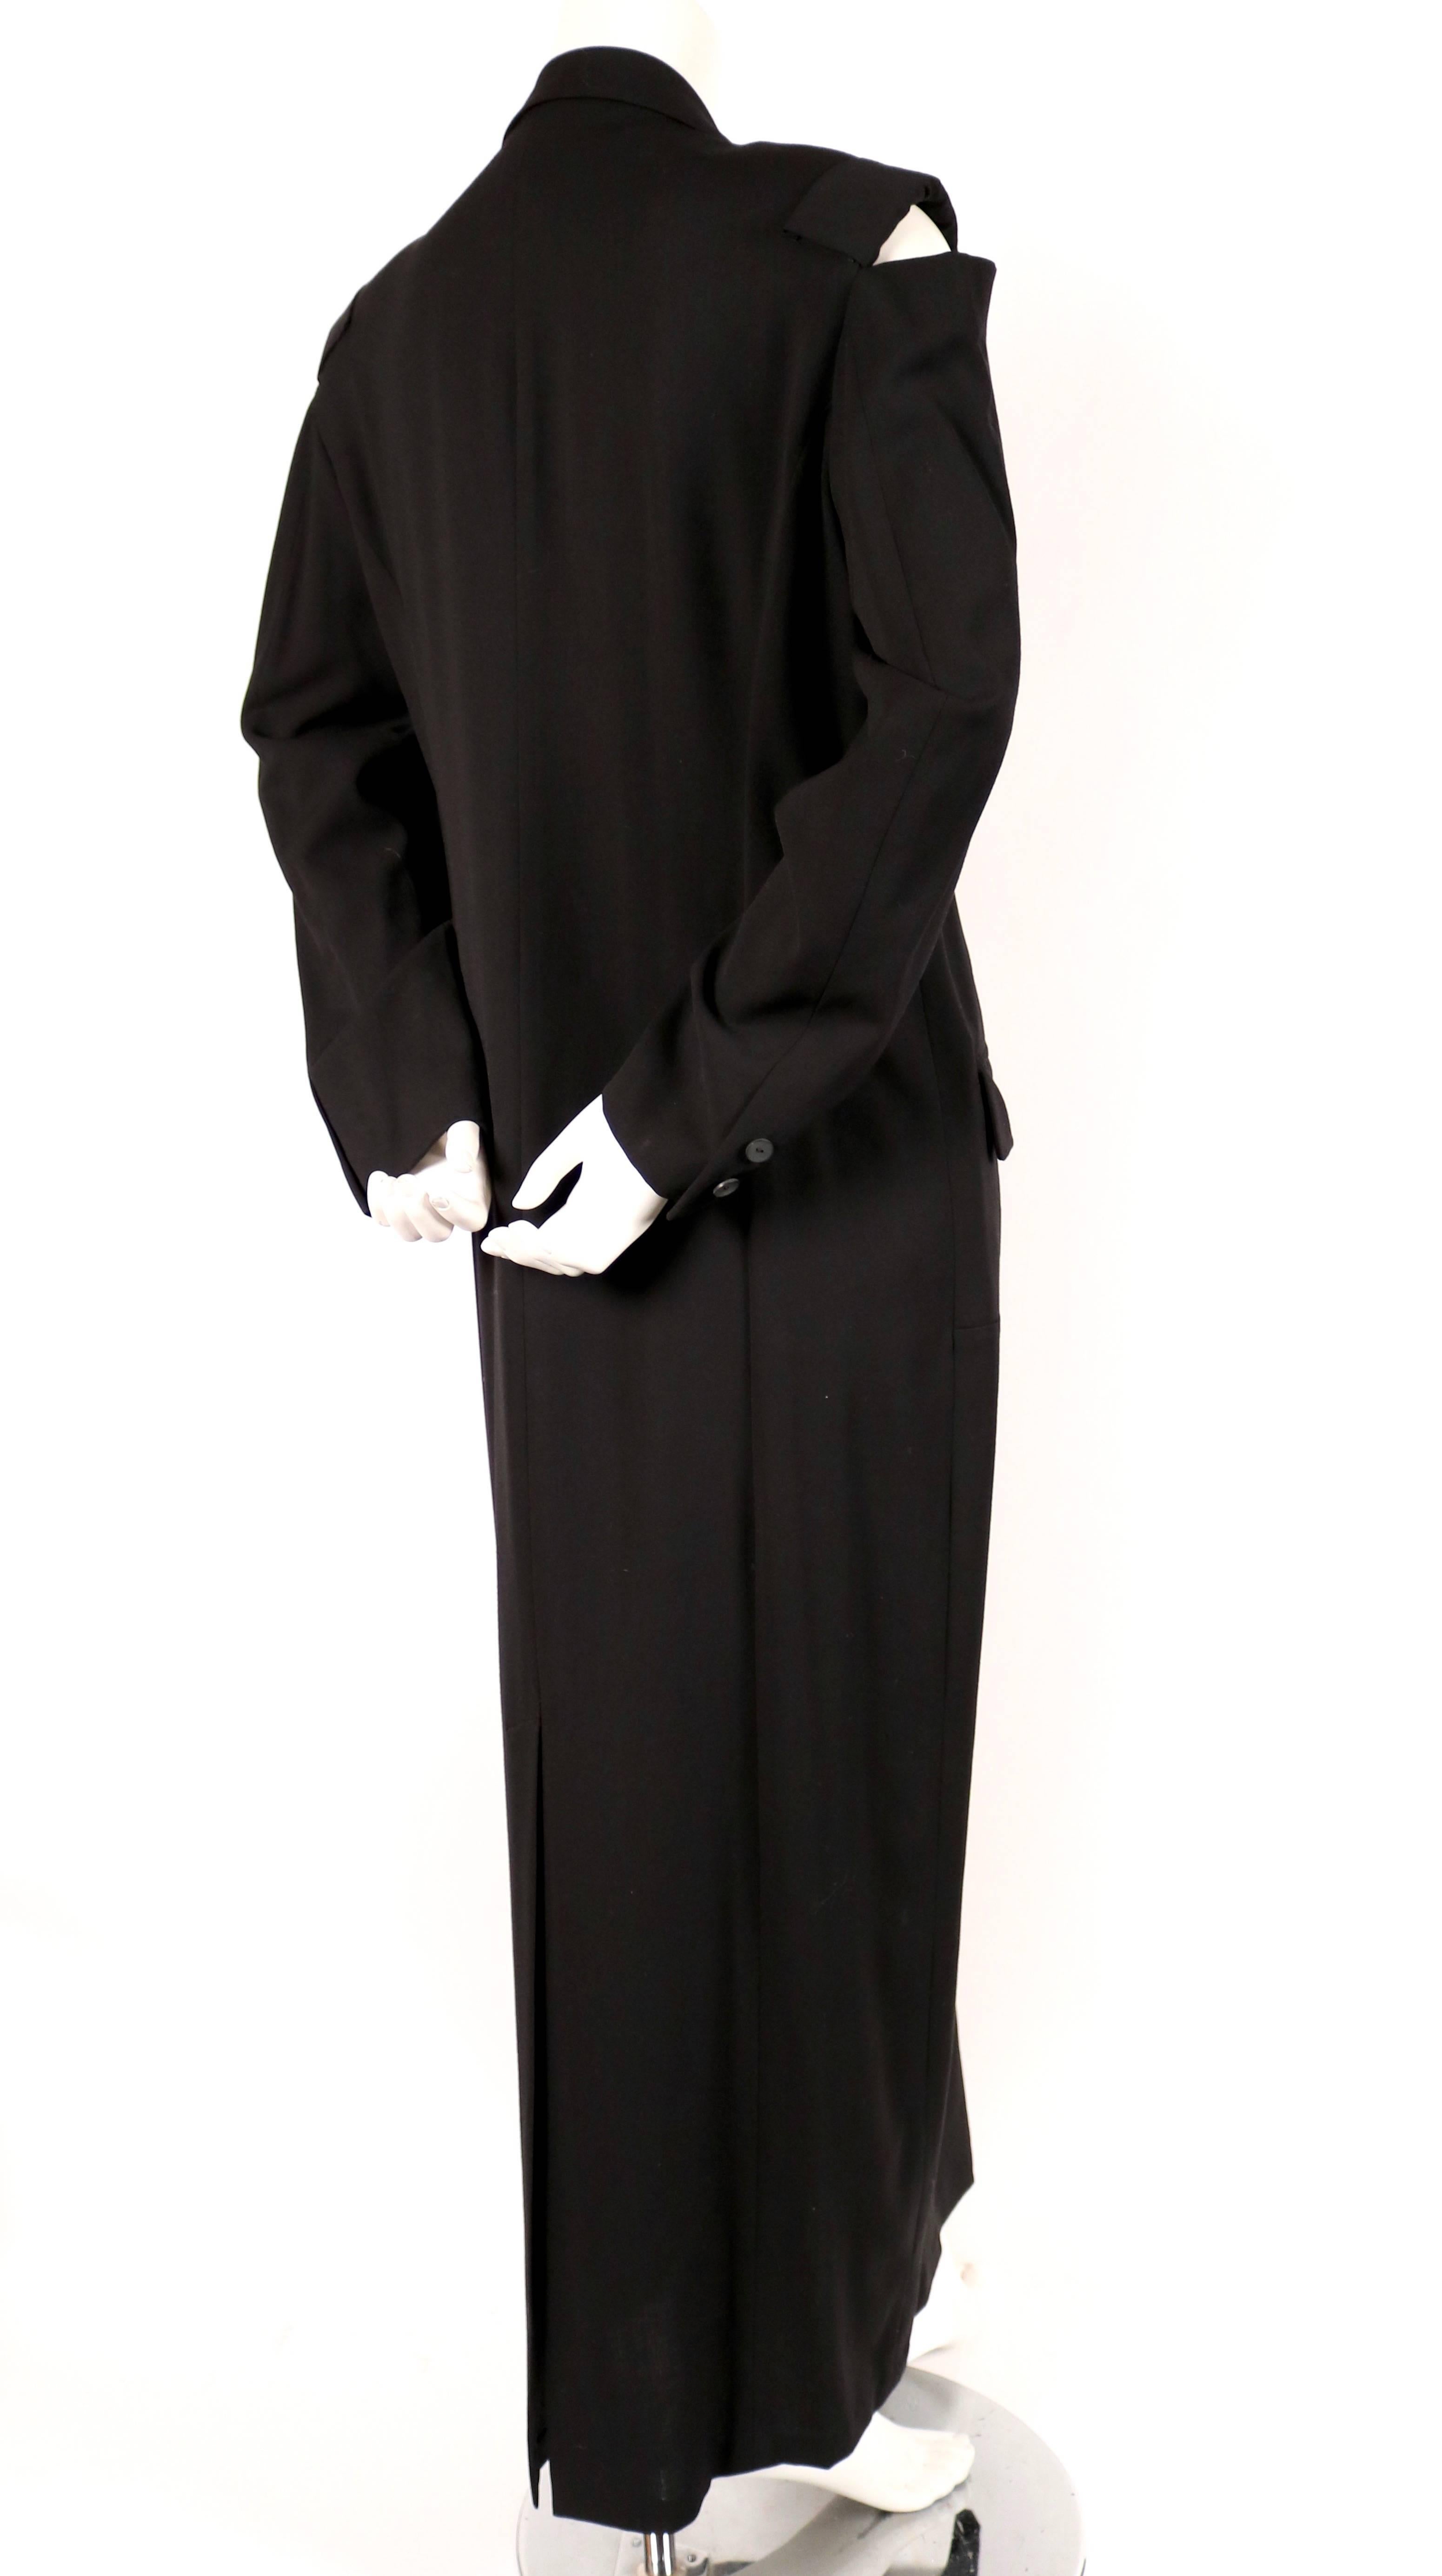 Black long men's style wool dress with cutout shoulders designed by Yohji Yamamoto dating to the 1980's. Labeled a size 'M'. Intended to have a loose oversized fit. Approximate measurements: shoulder 17.75